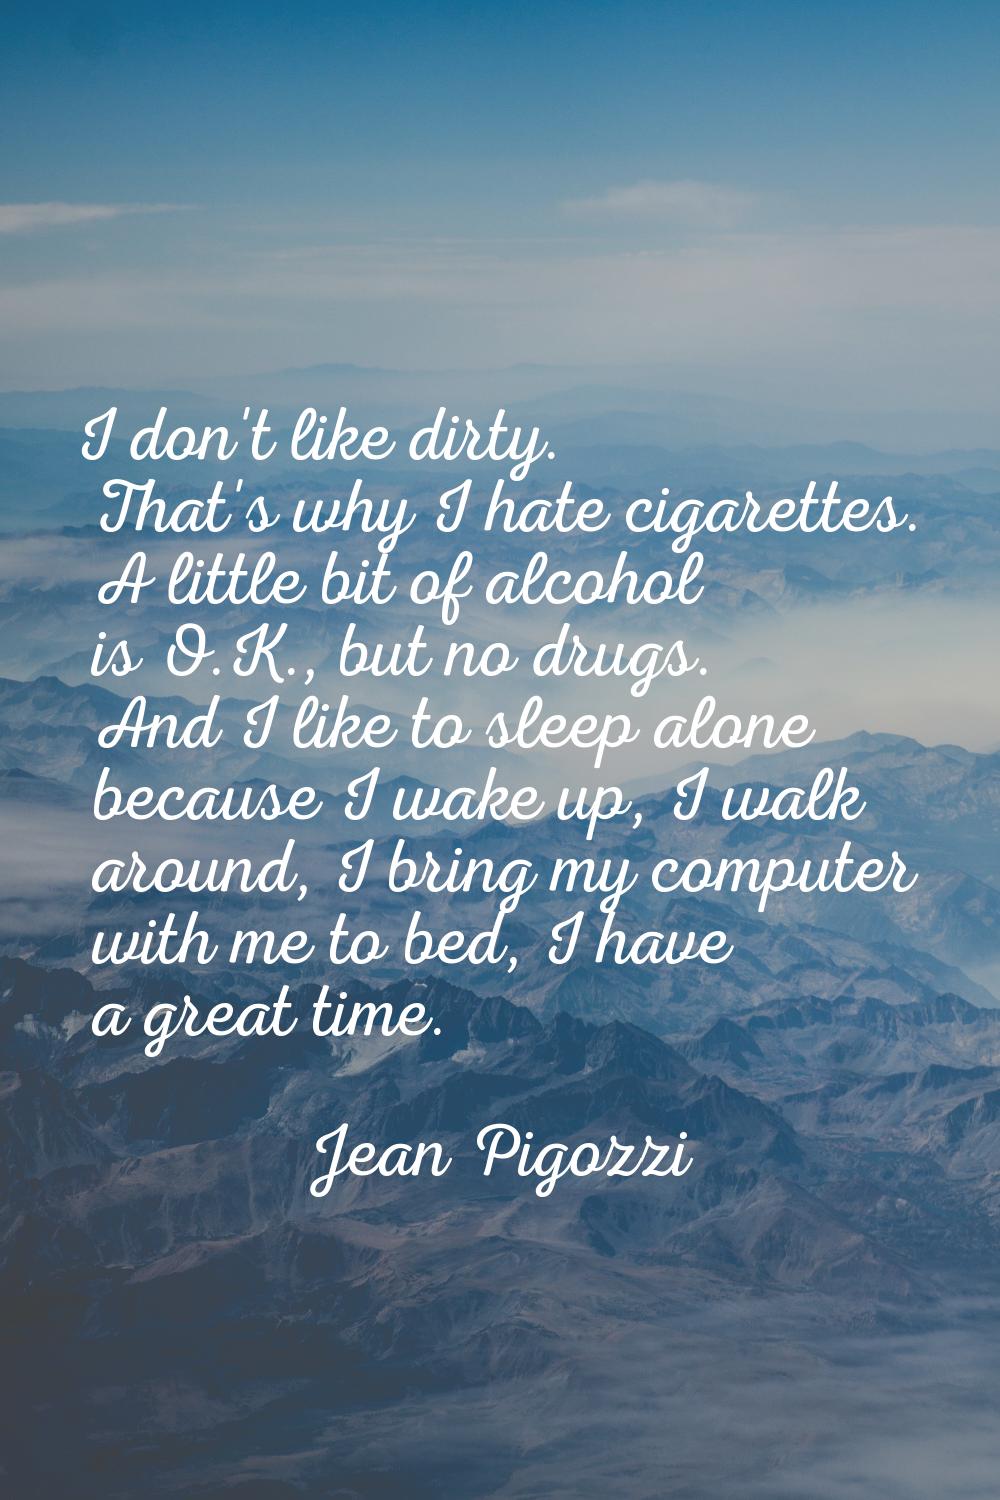 I don't like dirty. That's why I hate cigarettes. A little bit of alcohol is O.K., but no drugs. An